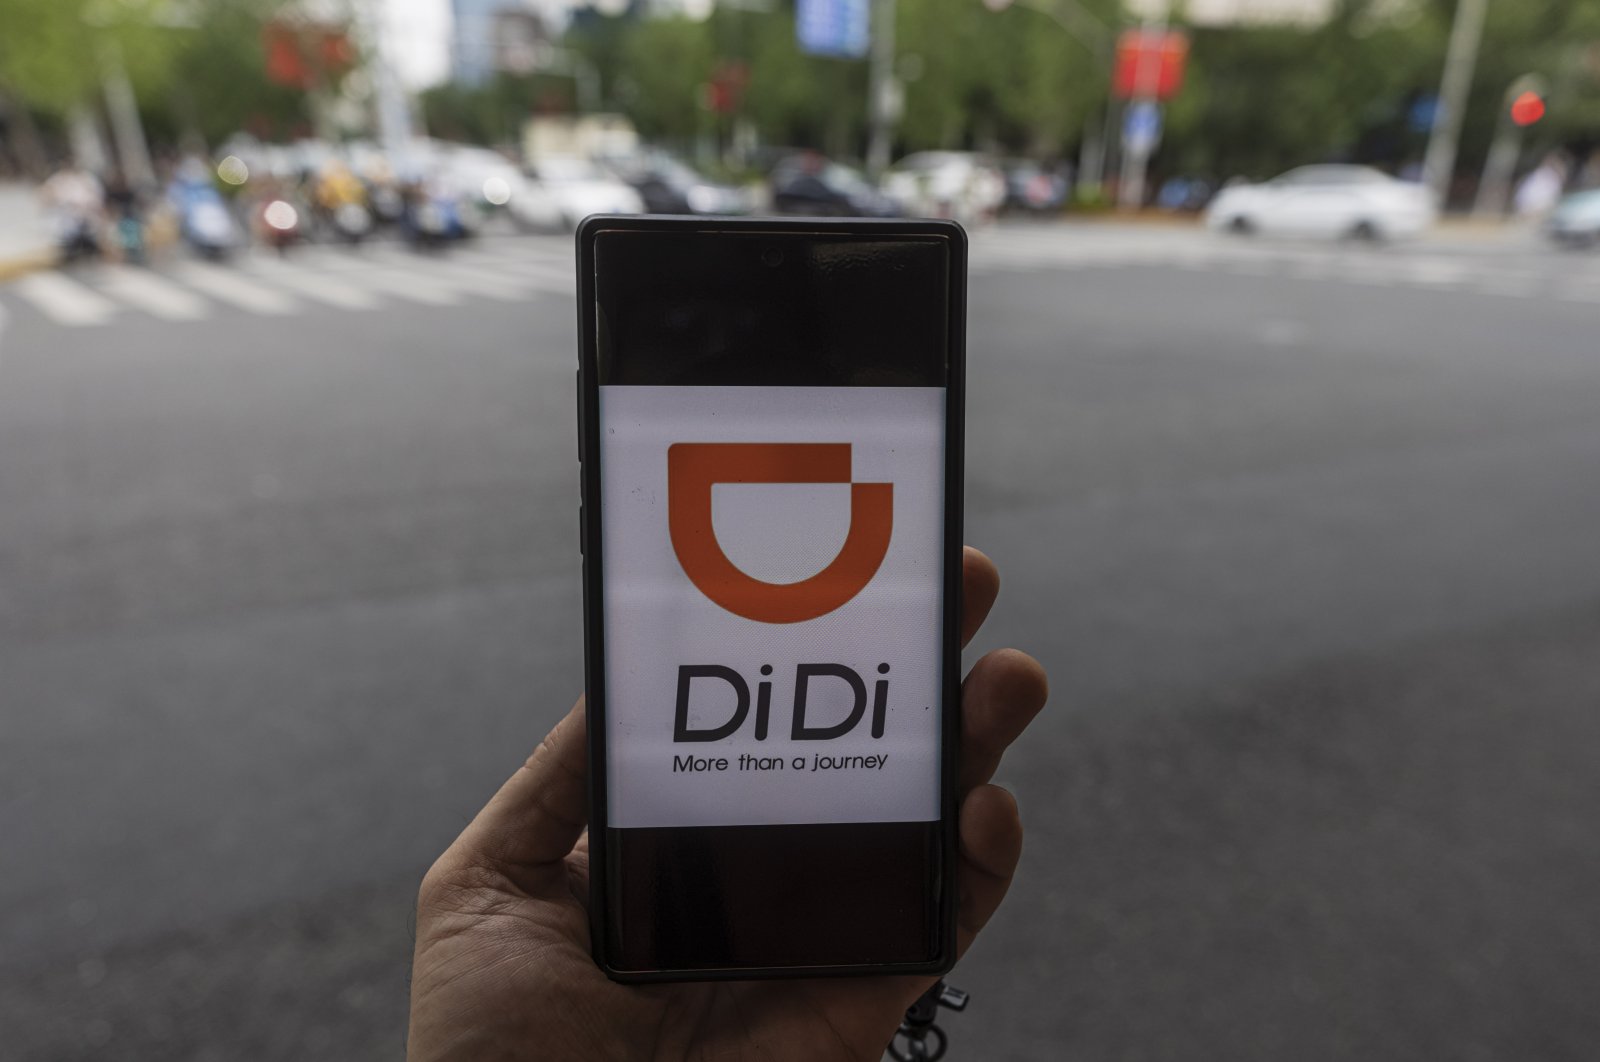 Ride-hailing giant Didi Chuxing mobile application is seen on a smartphone, in Shanghai, China, July 3, 2021. (EPA Photo)